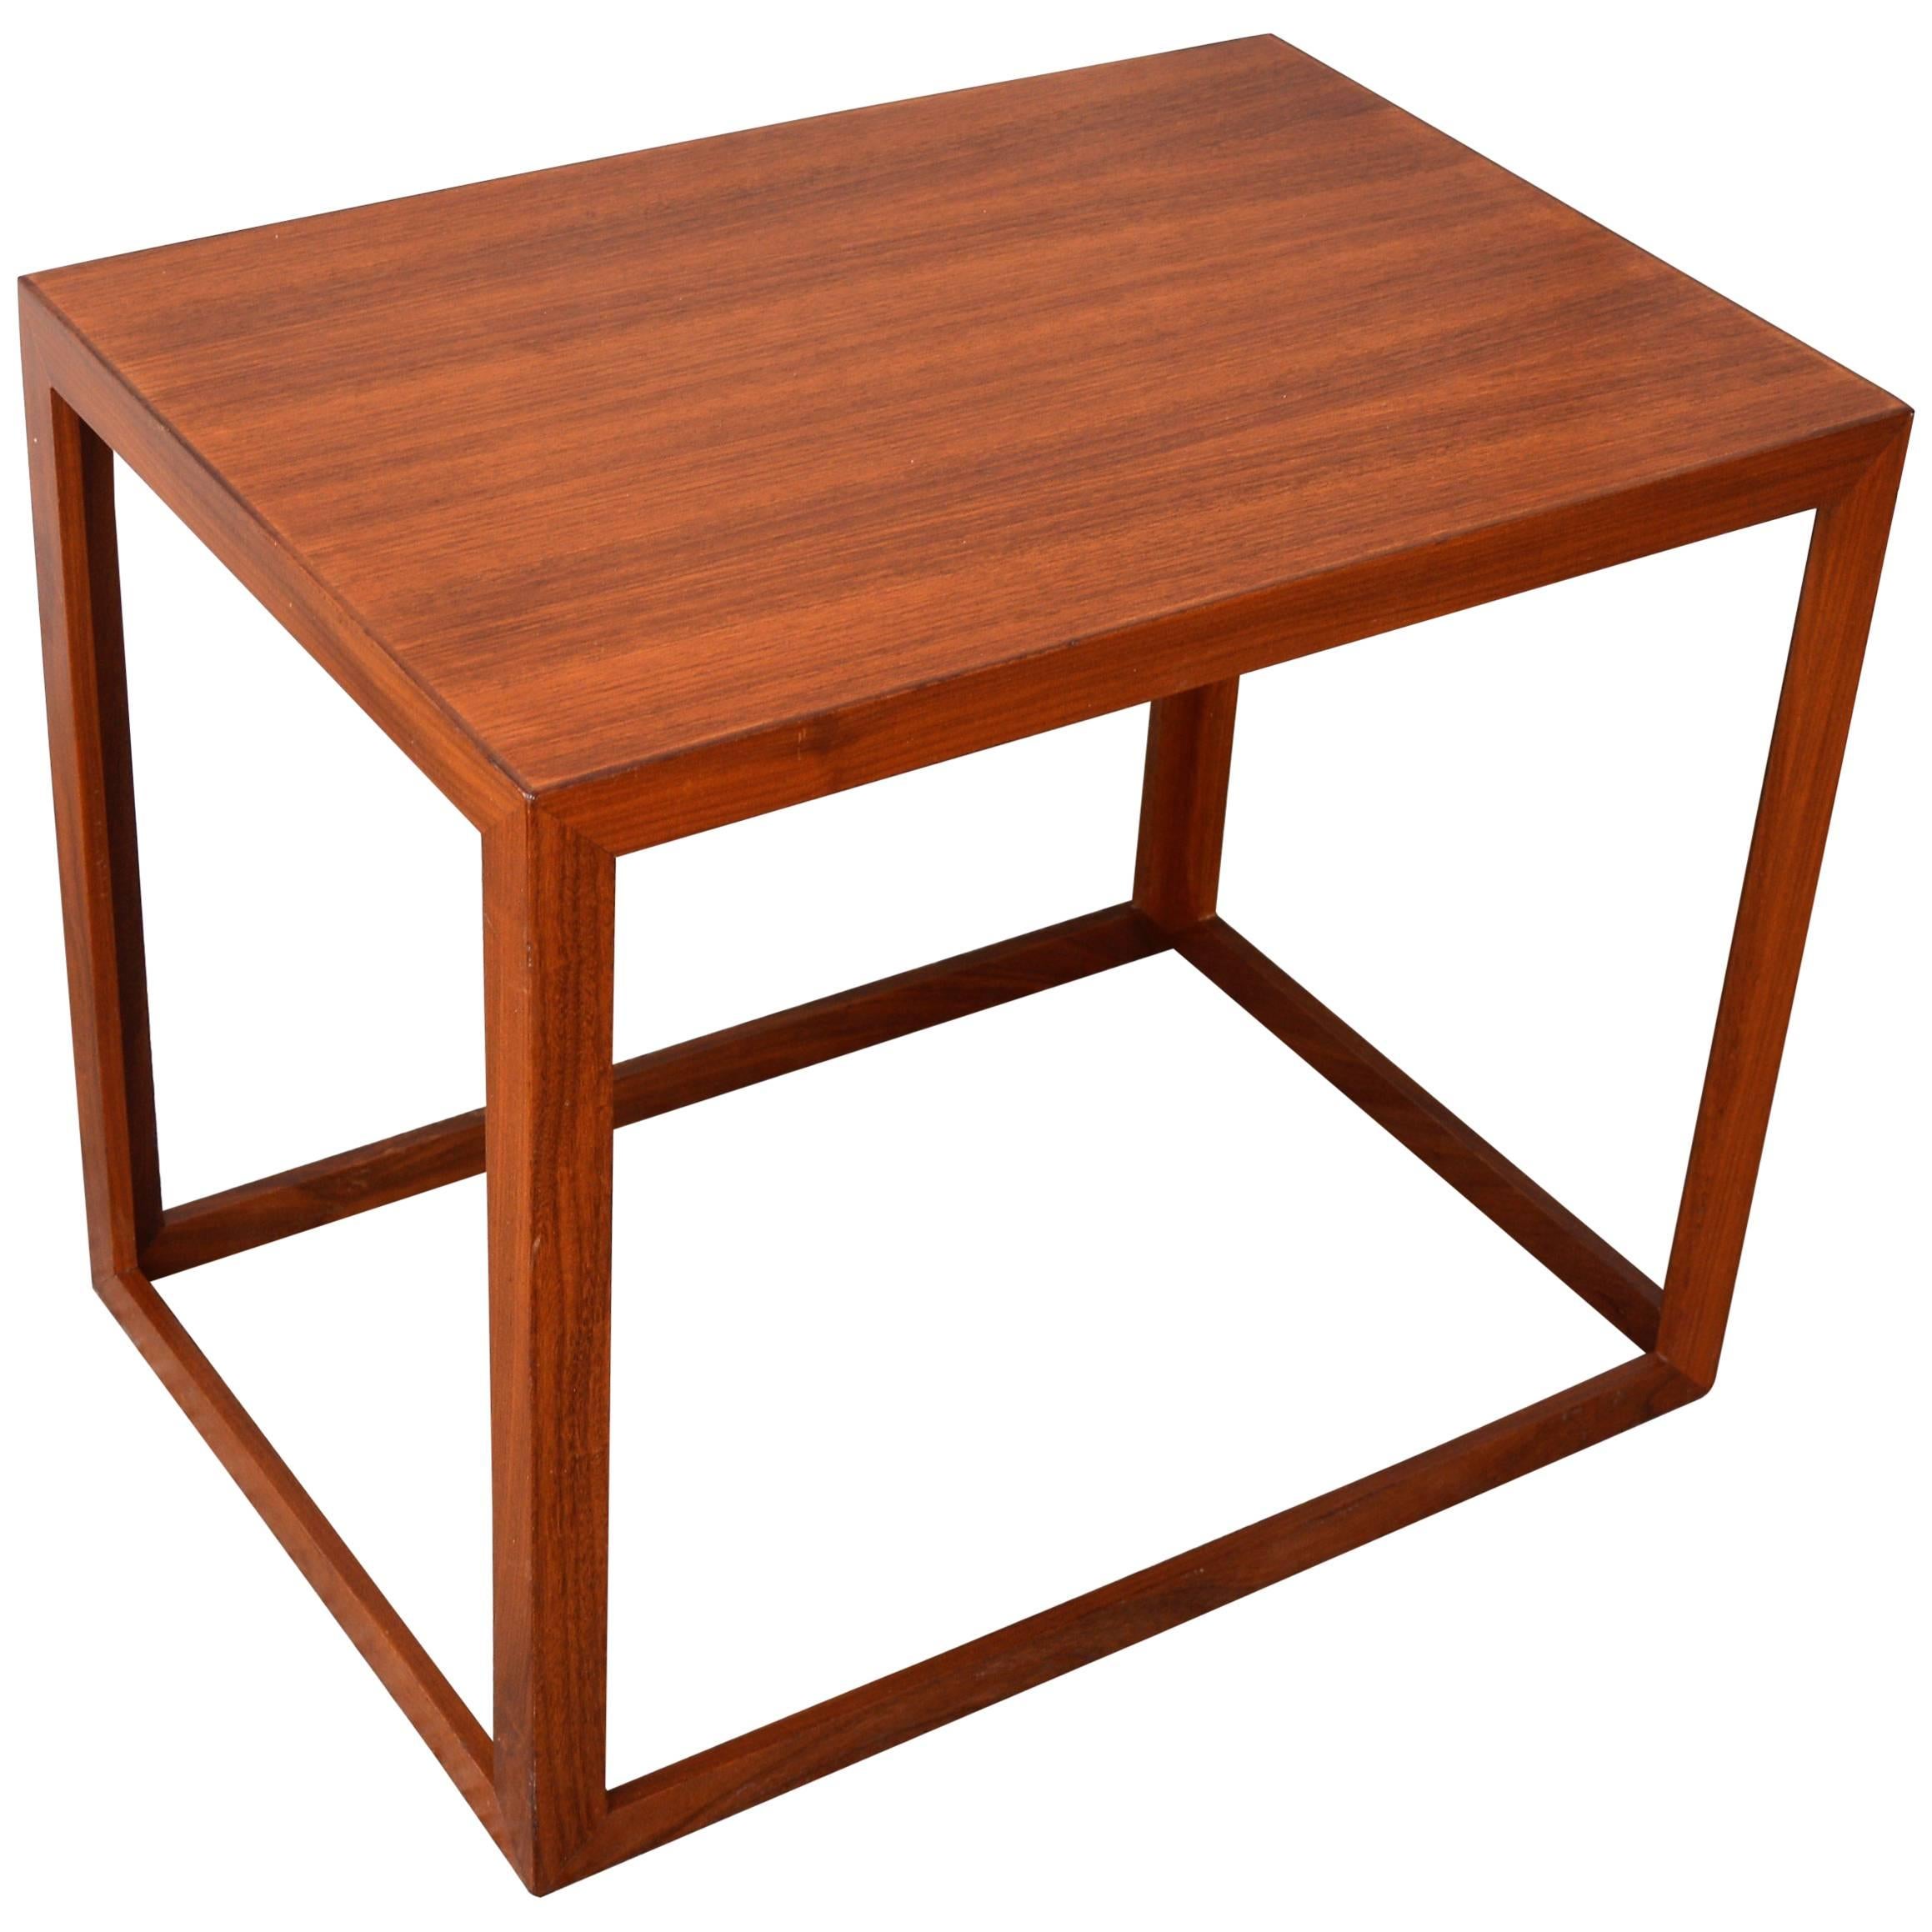 Danish Modern Teak and Mahogany Cube Side Table or Small Coffee Table